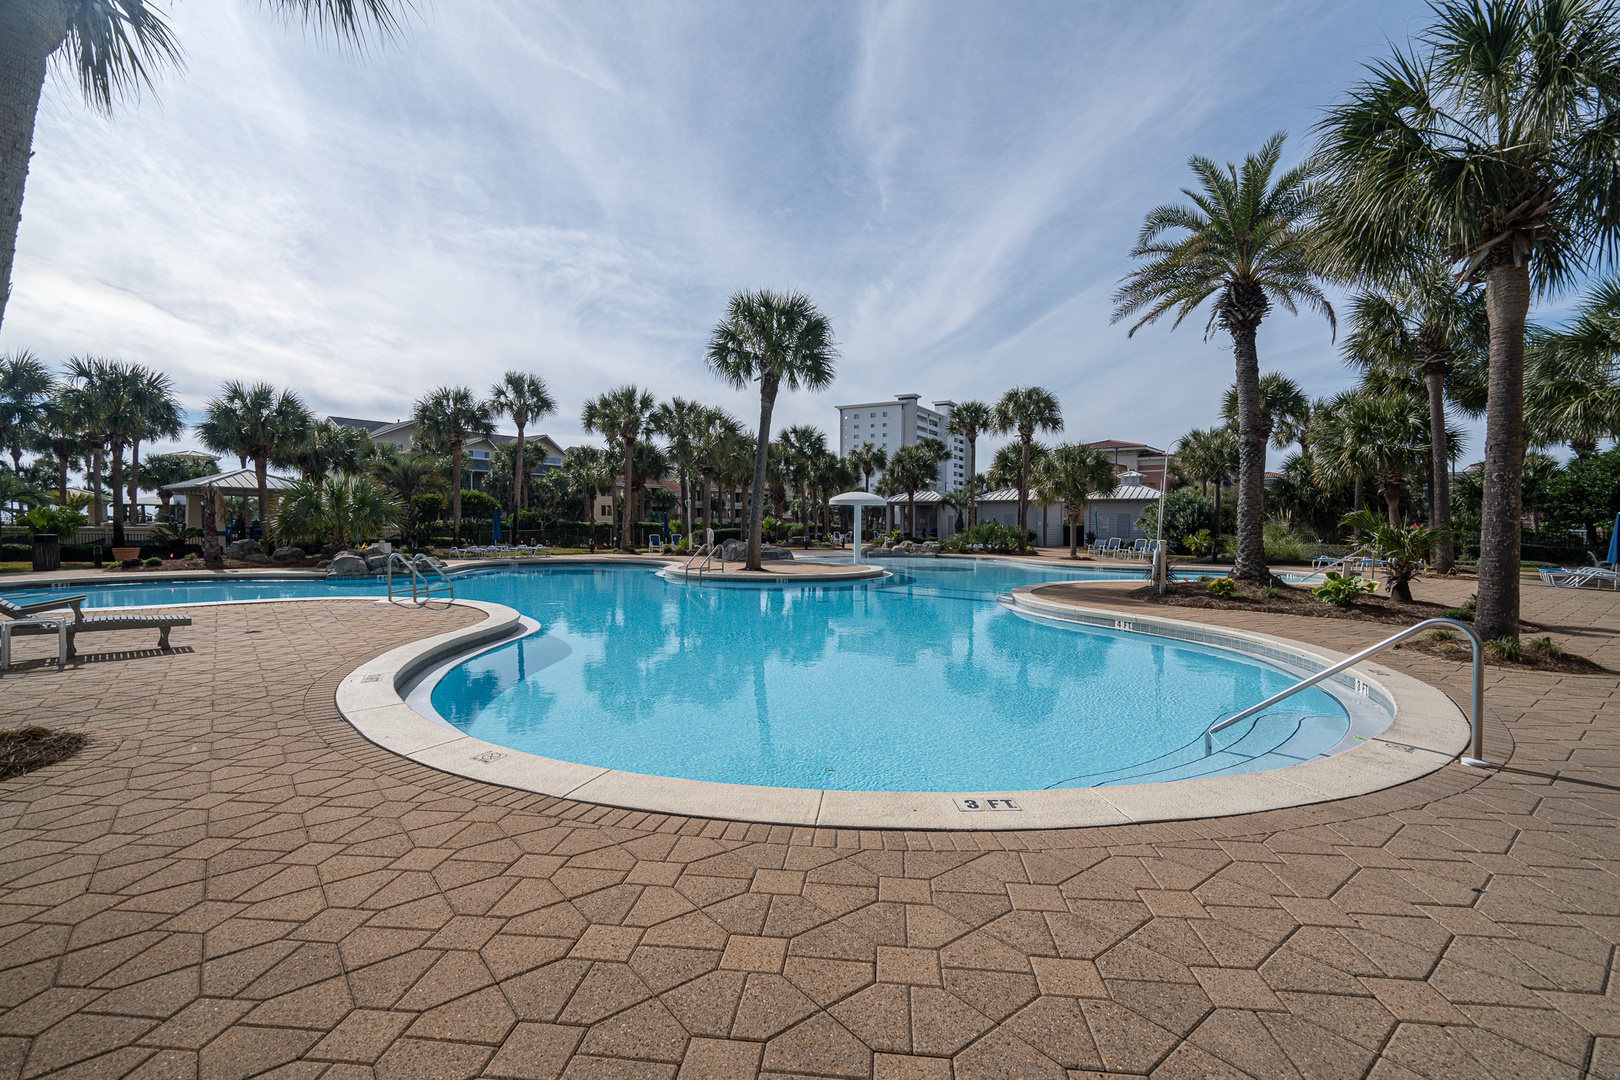 Make a splash or lounge the day away at the sparkling community pool